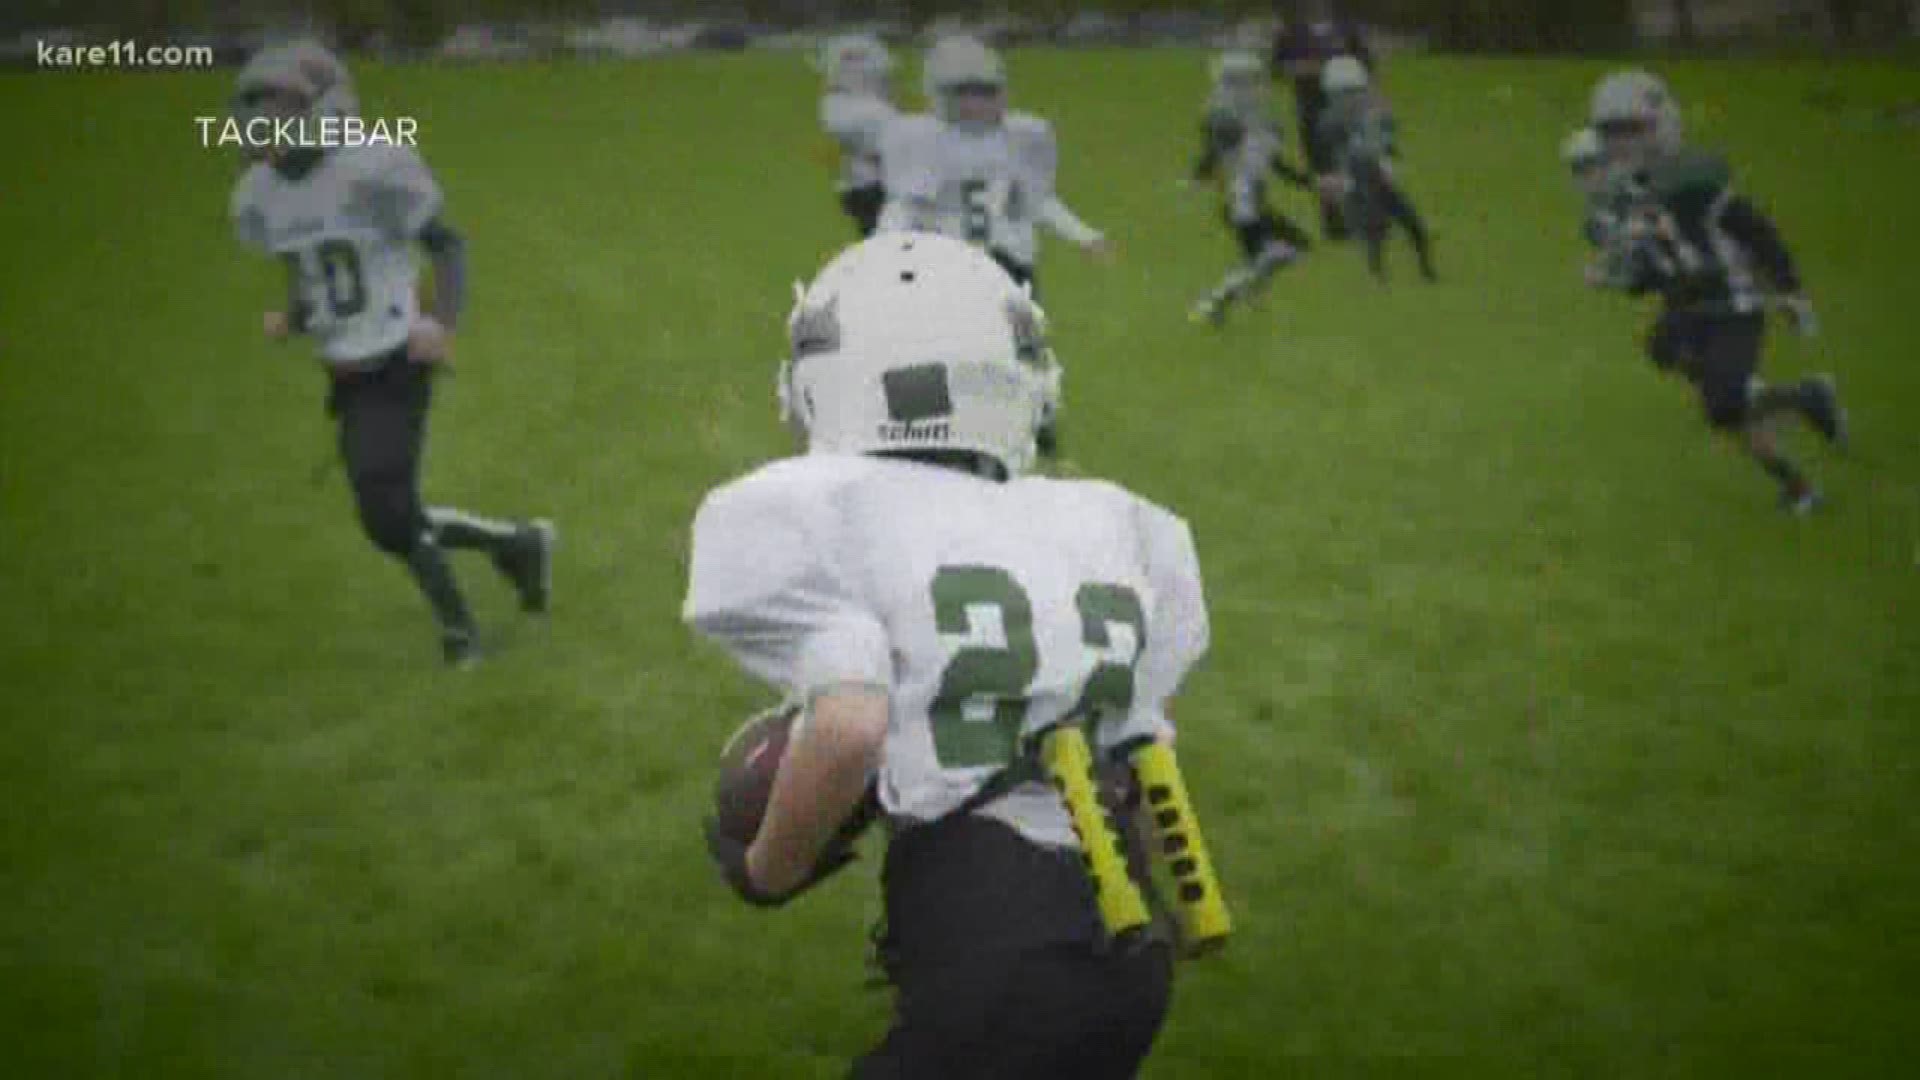 TackleBar football is exploding in popularity and a new study from the University of Minnesota is showing that it is a safer alternative for young kids.